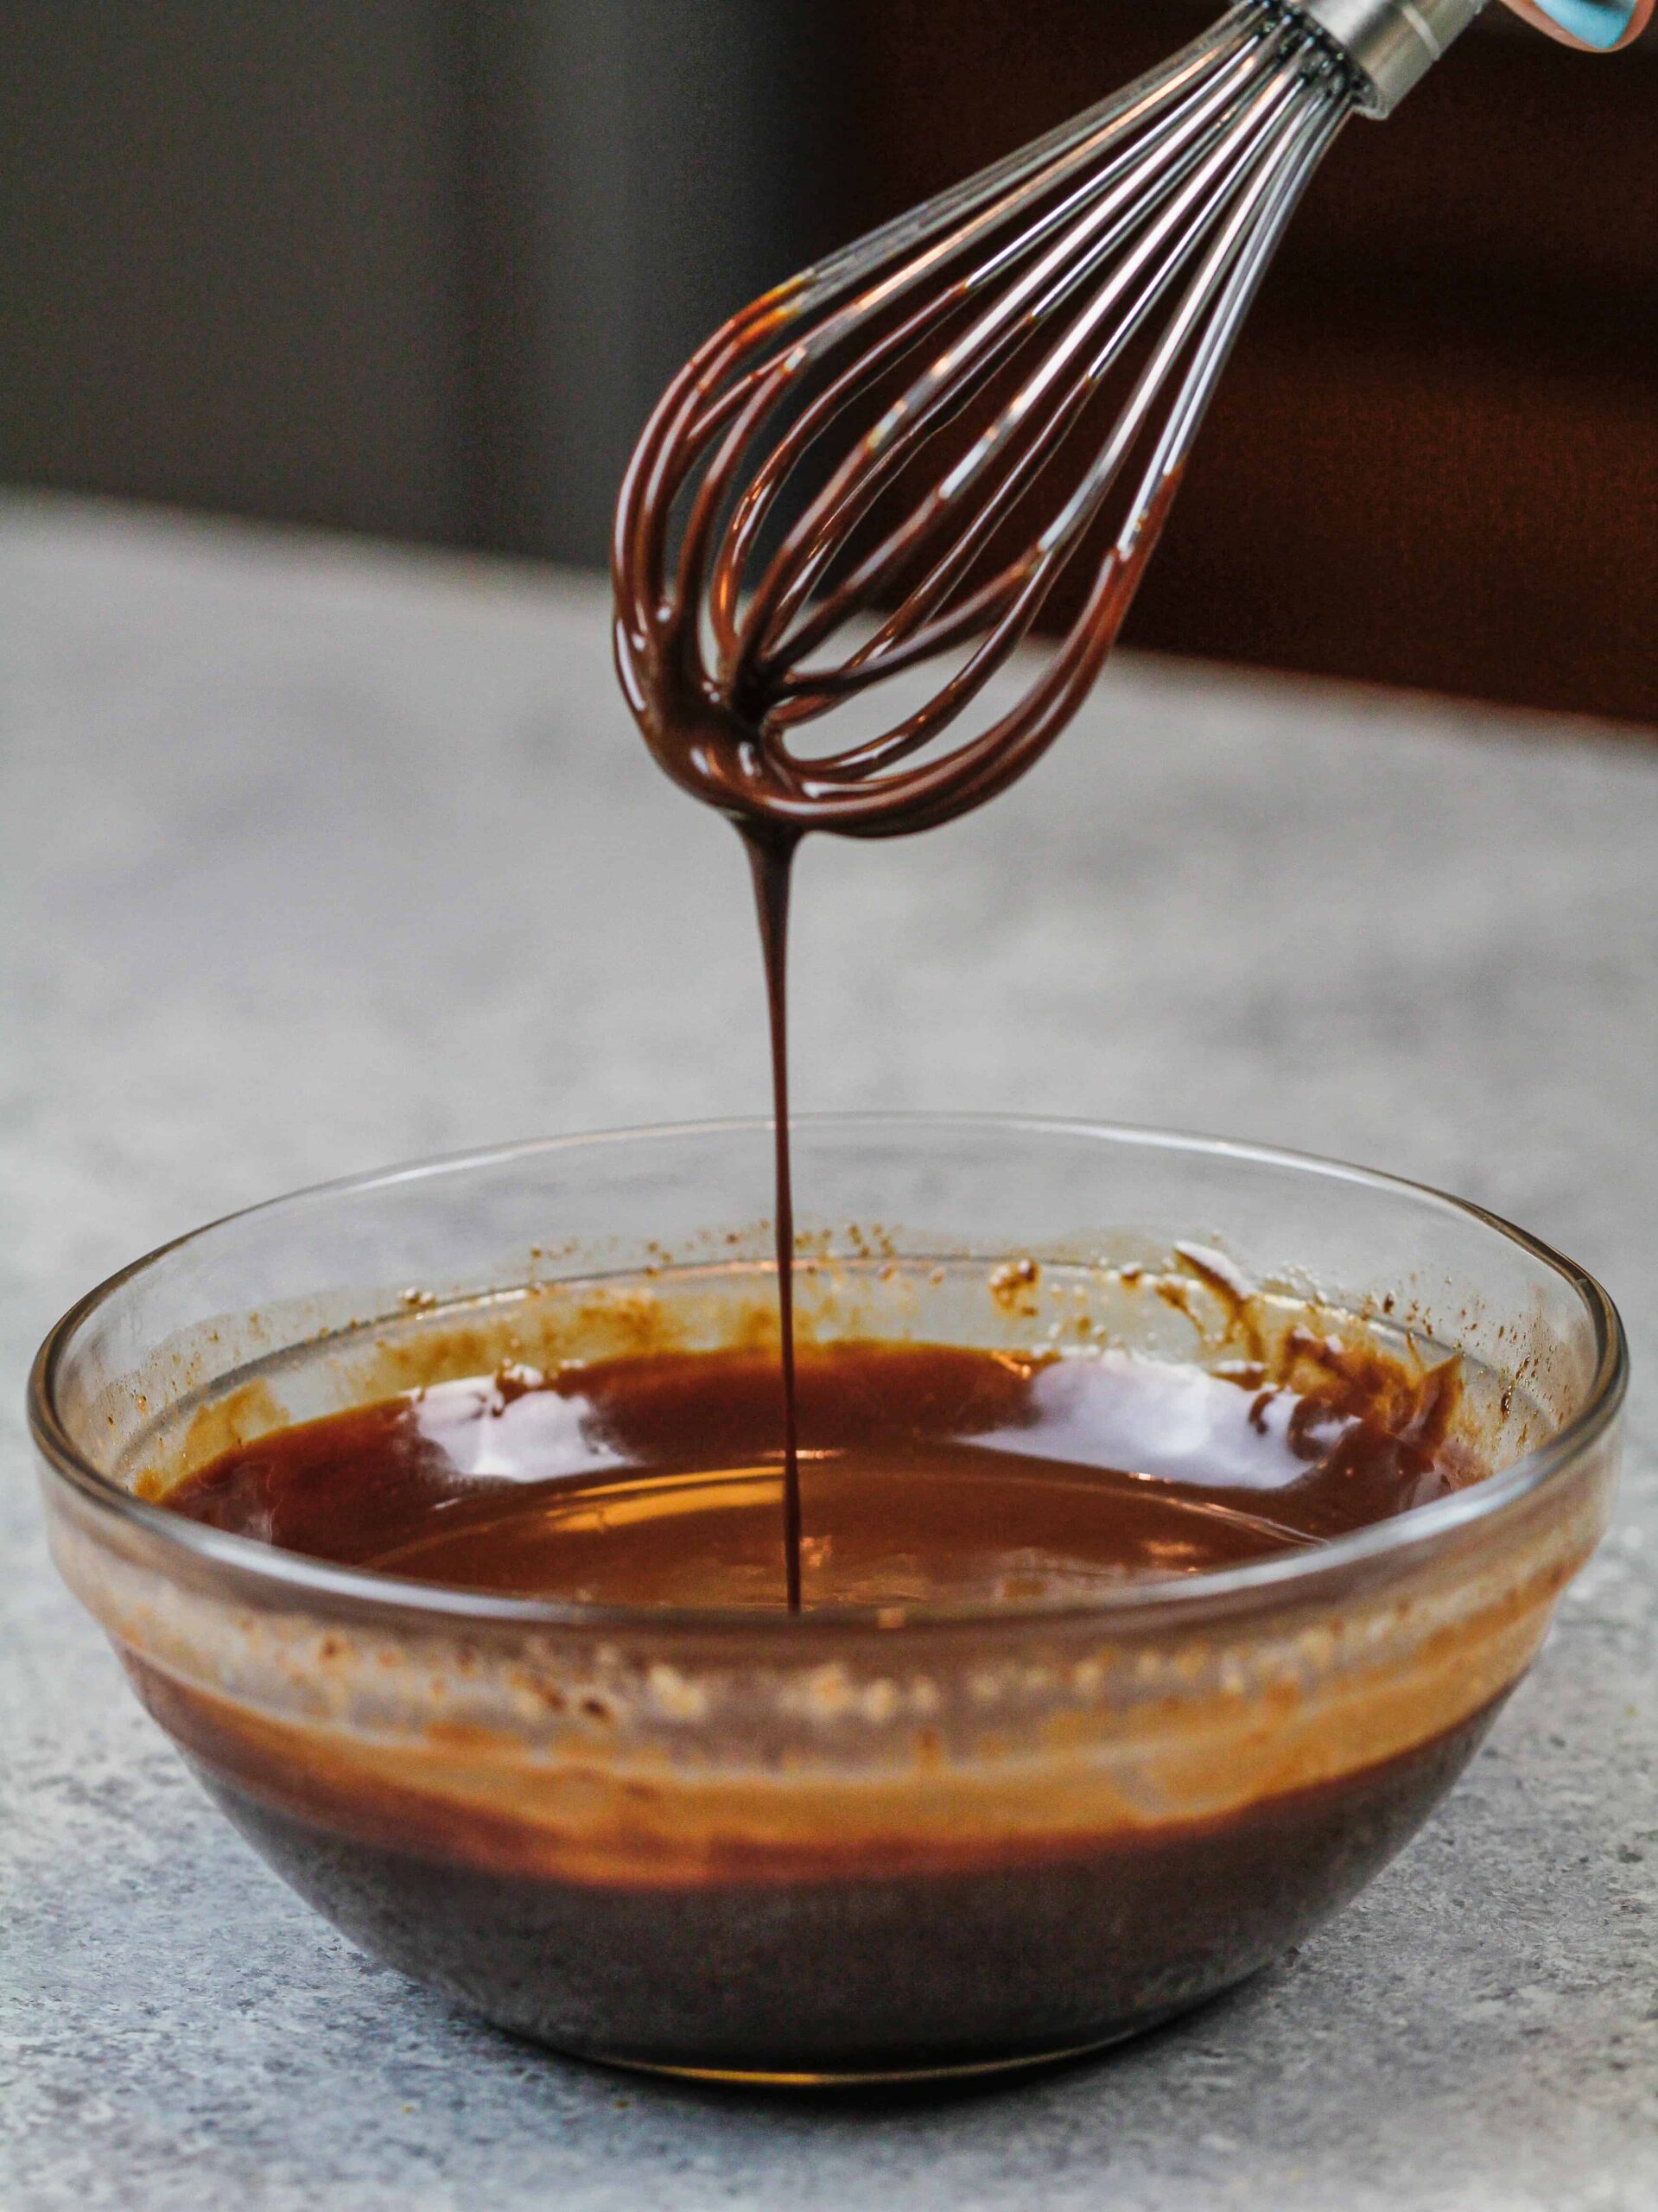 image of chocolate ganache ready to be swirled into marble cake layers